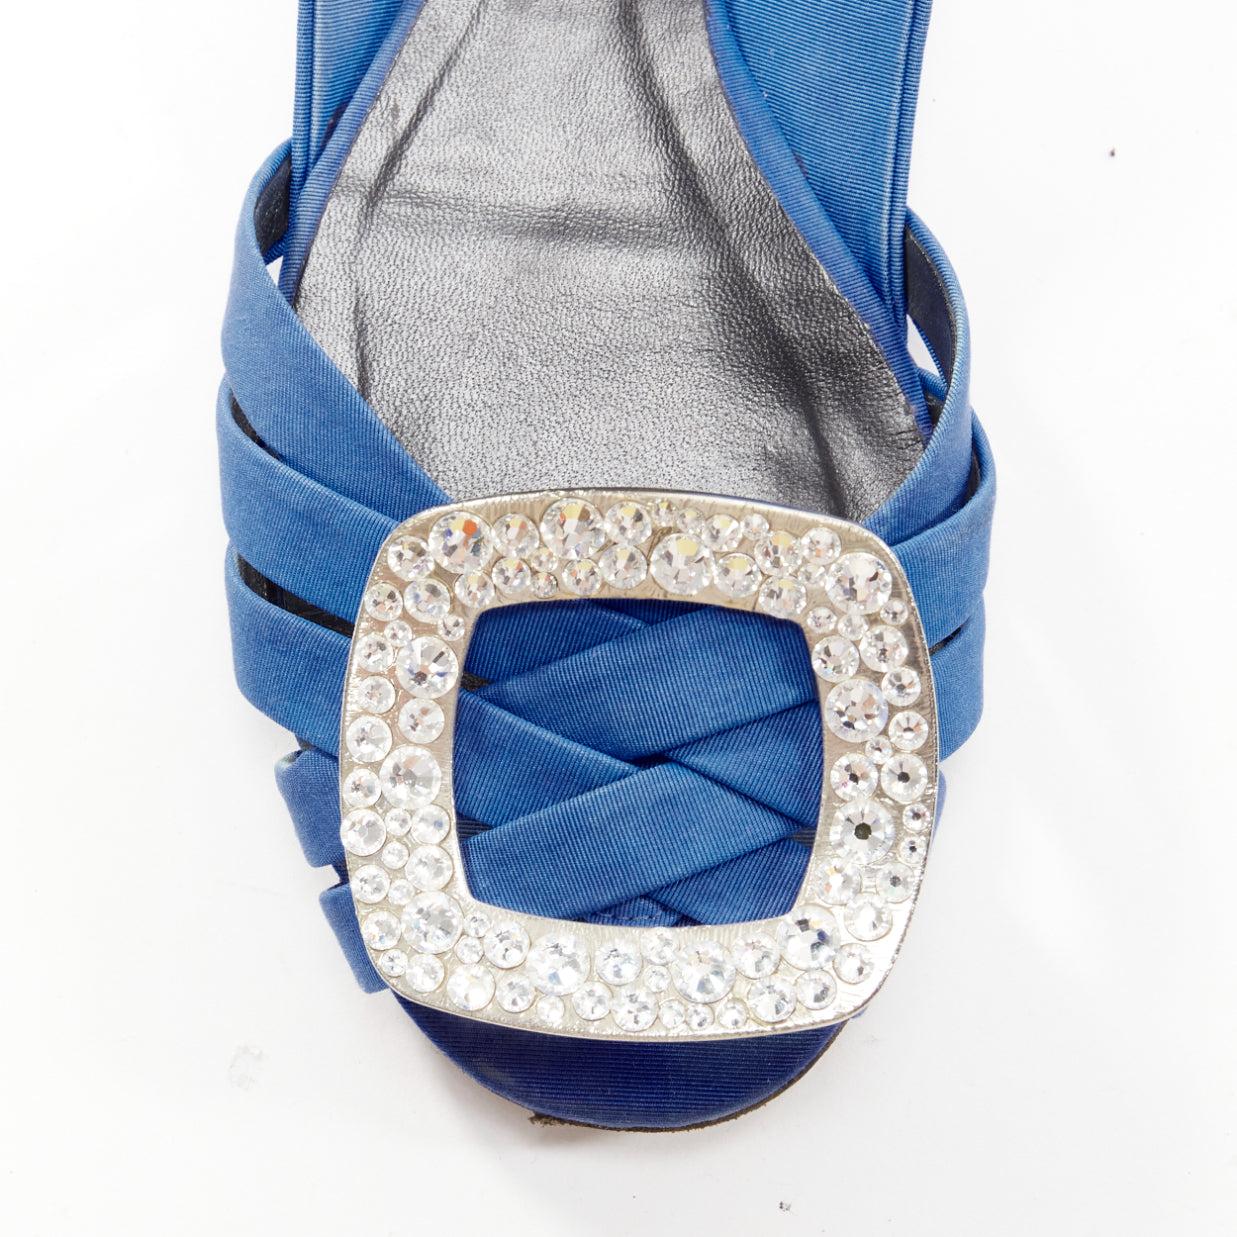 ROGER VIVIER blue satin crystal square buckles woven front pep toe flats EU34.5 For Sale 1